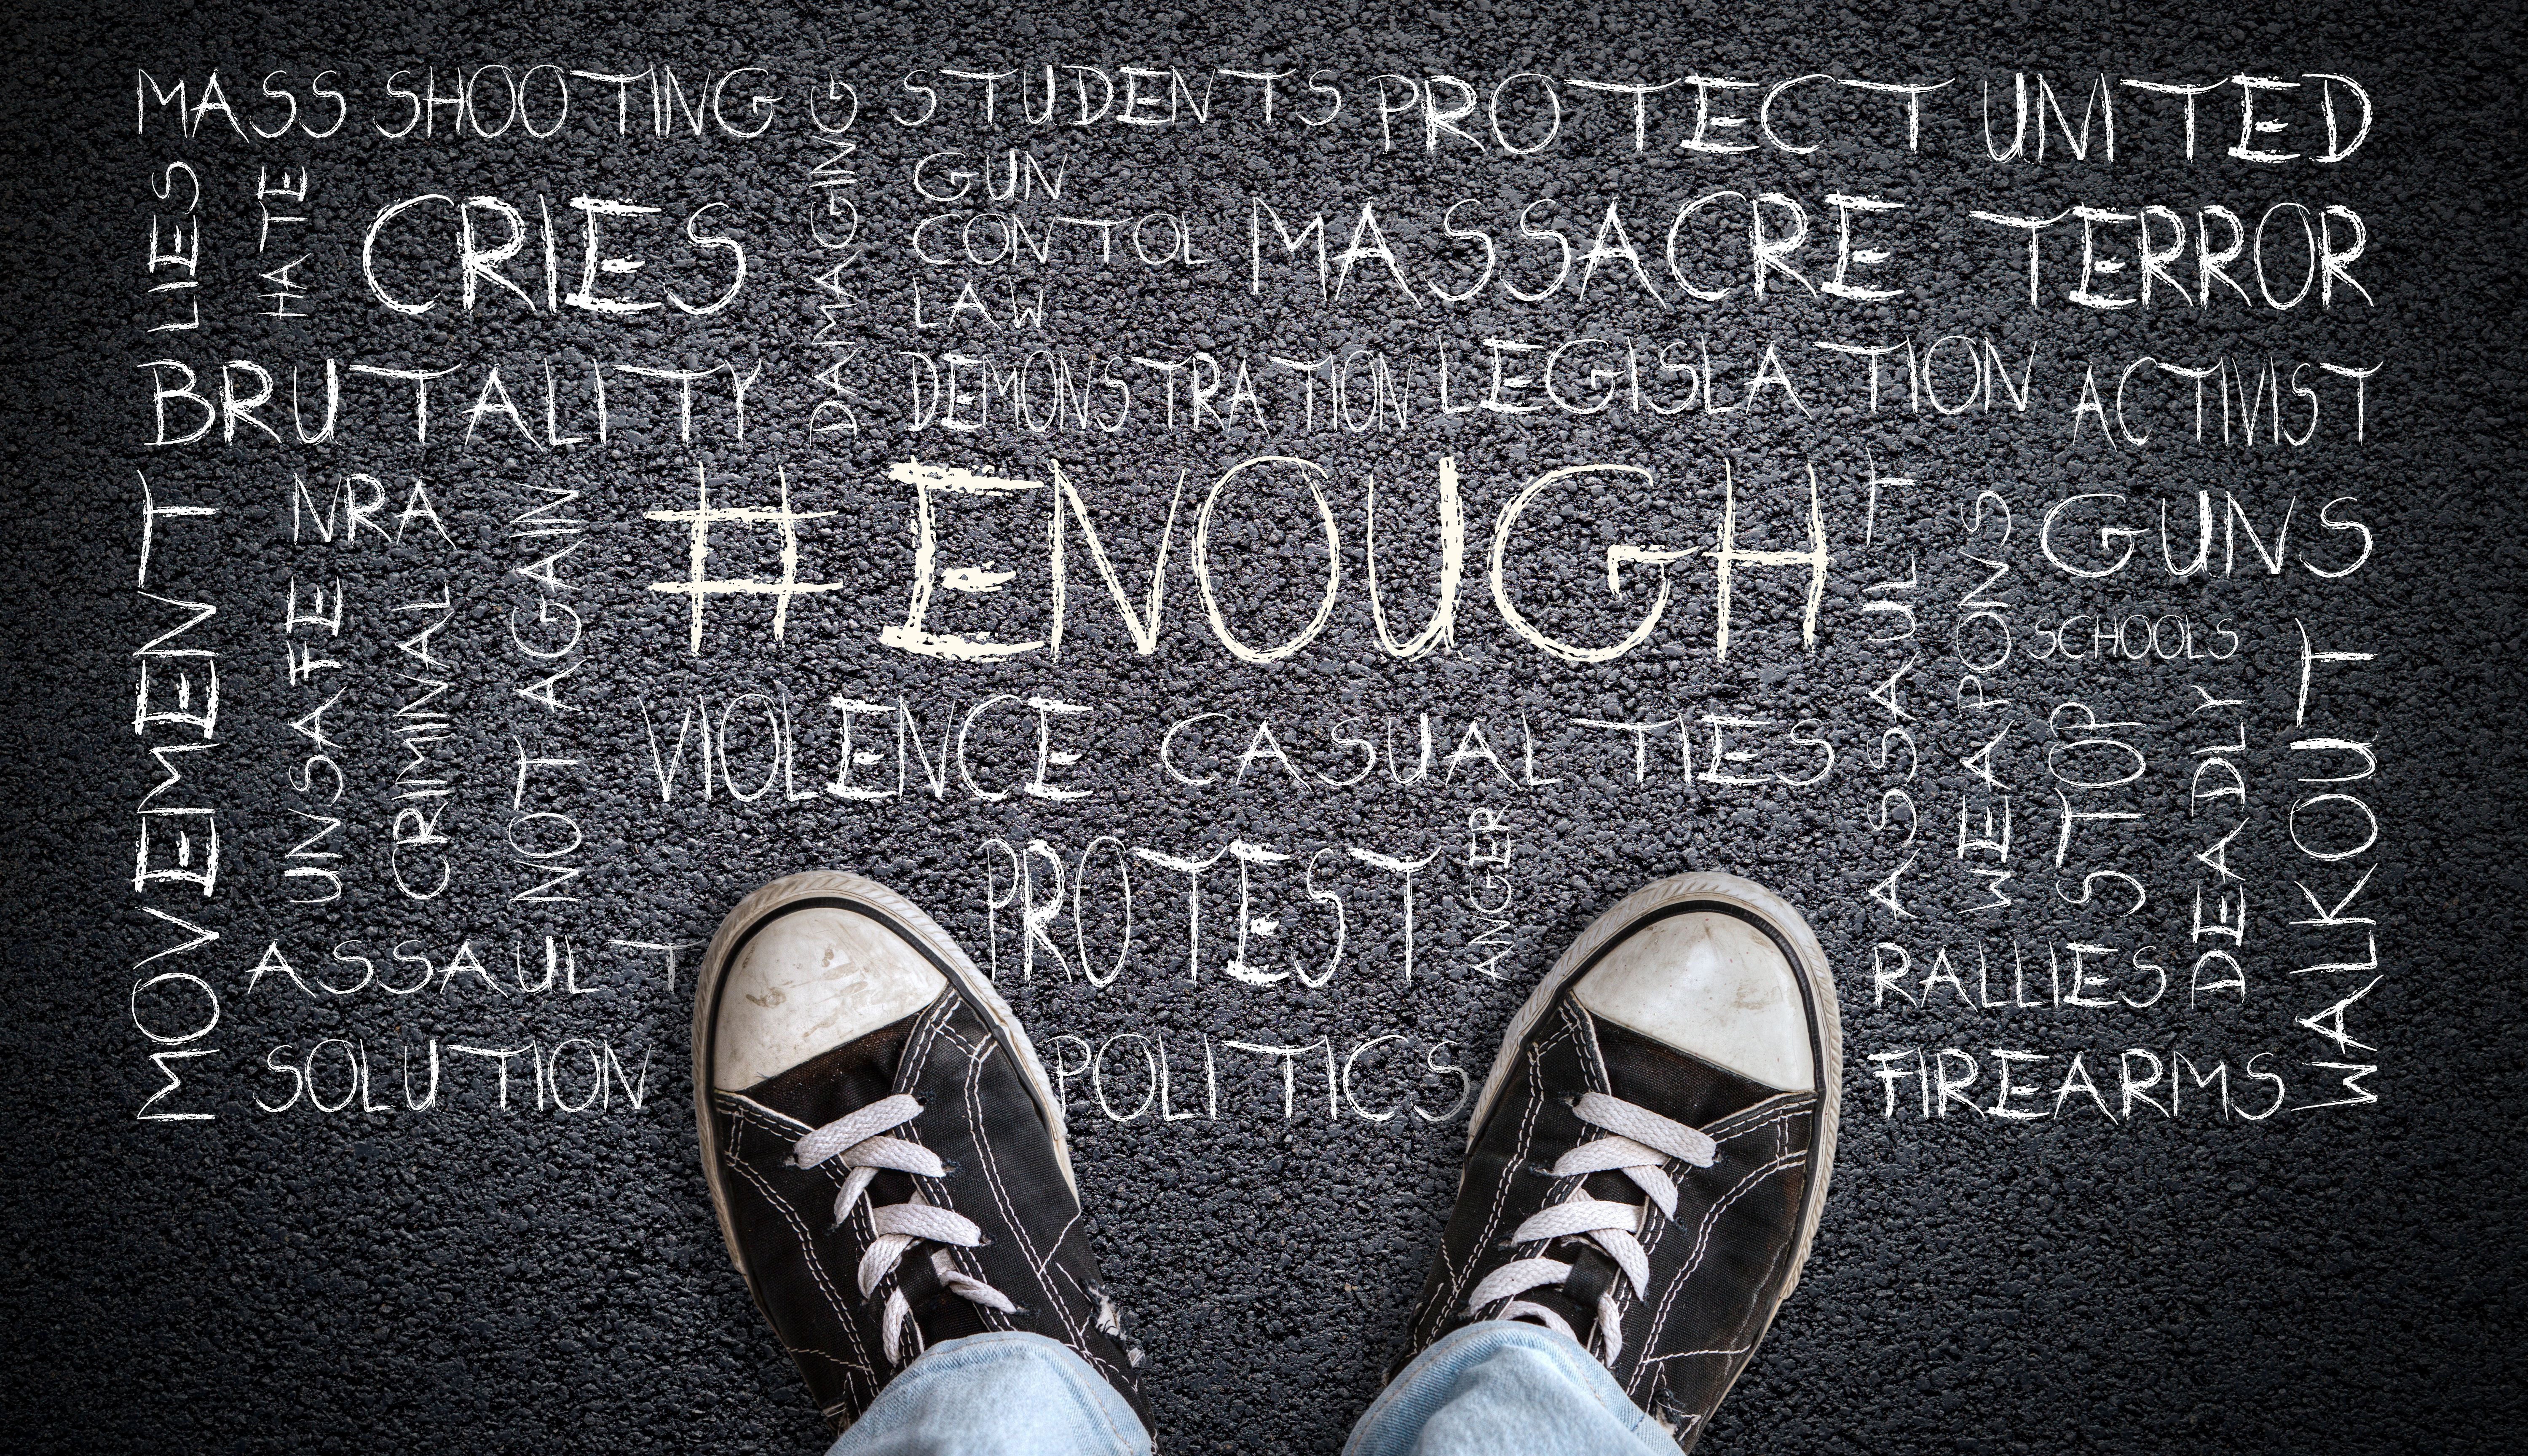  Coming Together as a Community to Prevent School Shootings at APA 2023 